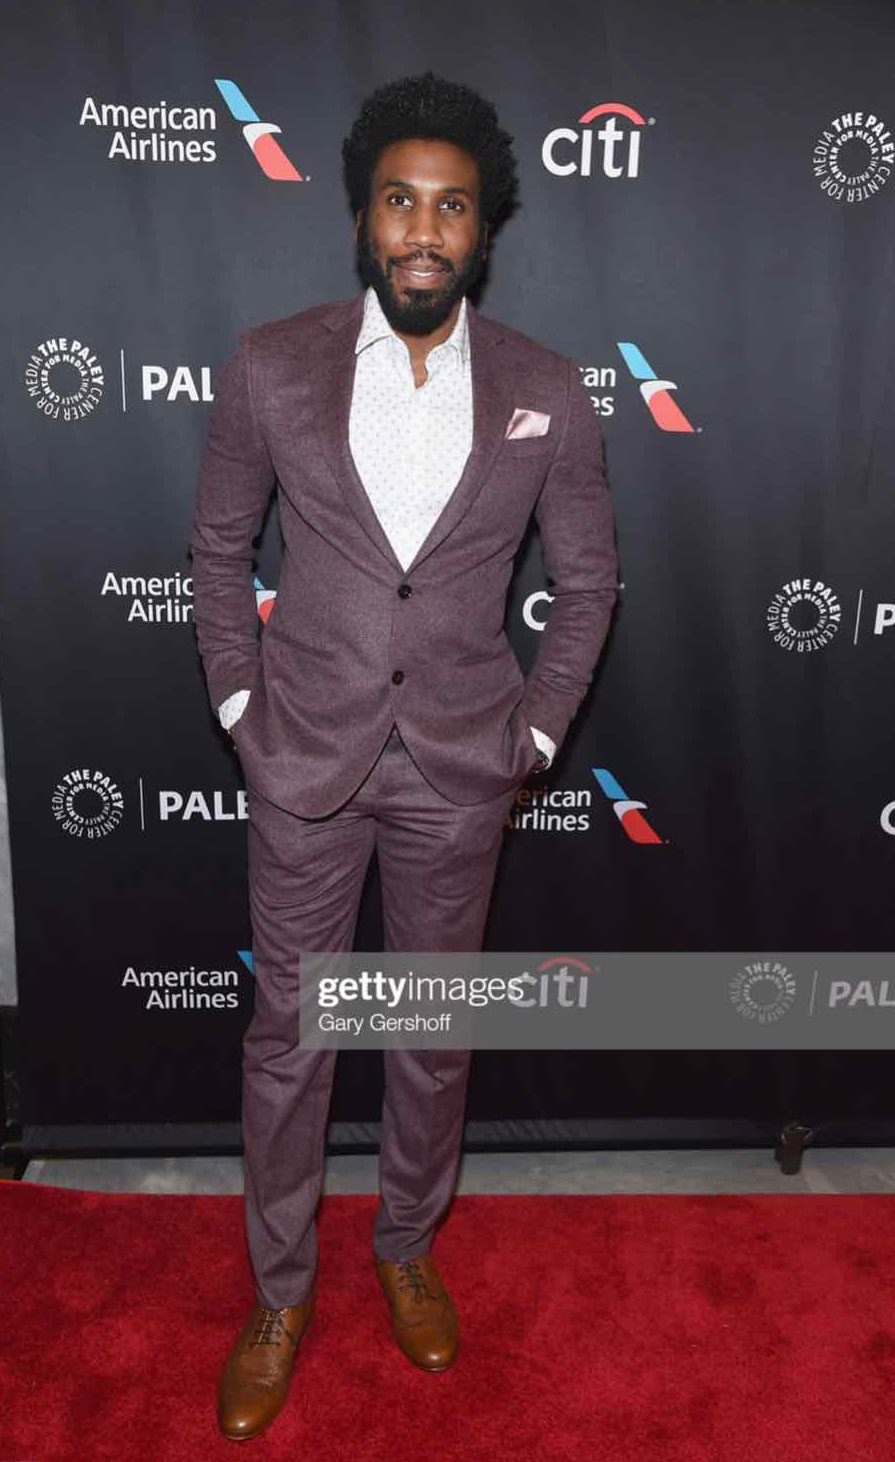 Los Angeles Fashion Stylist for Sterling K. Brown